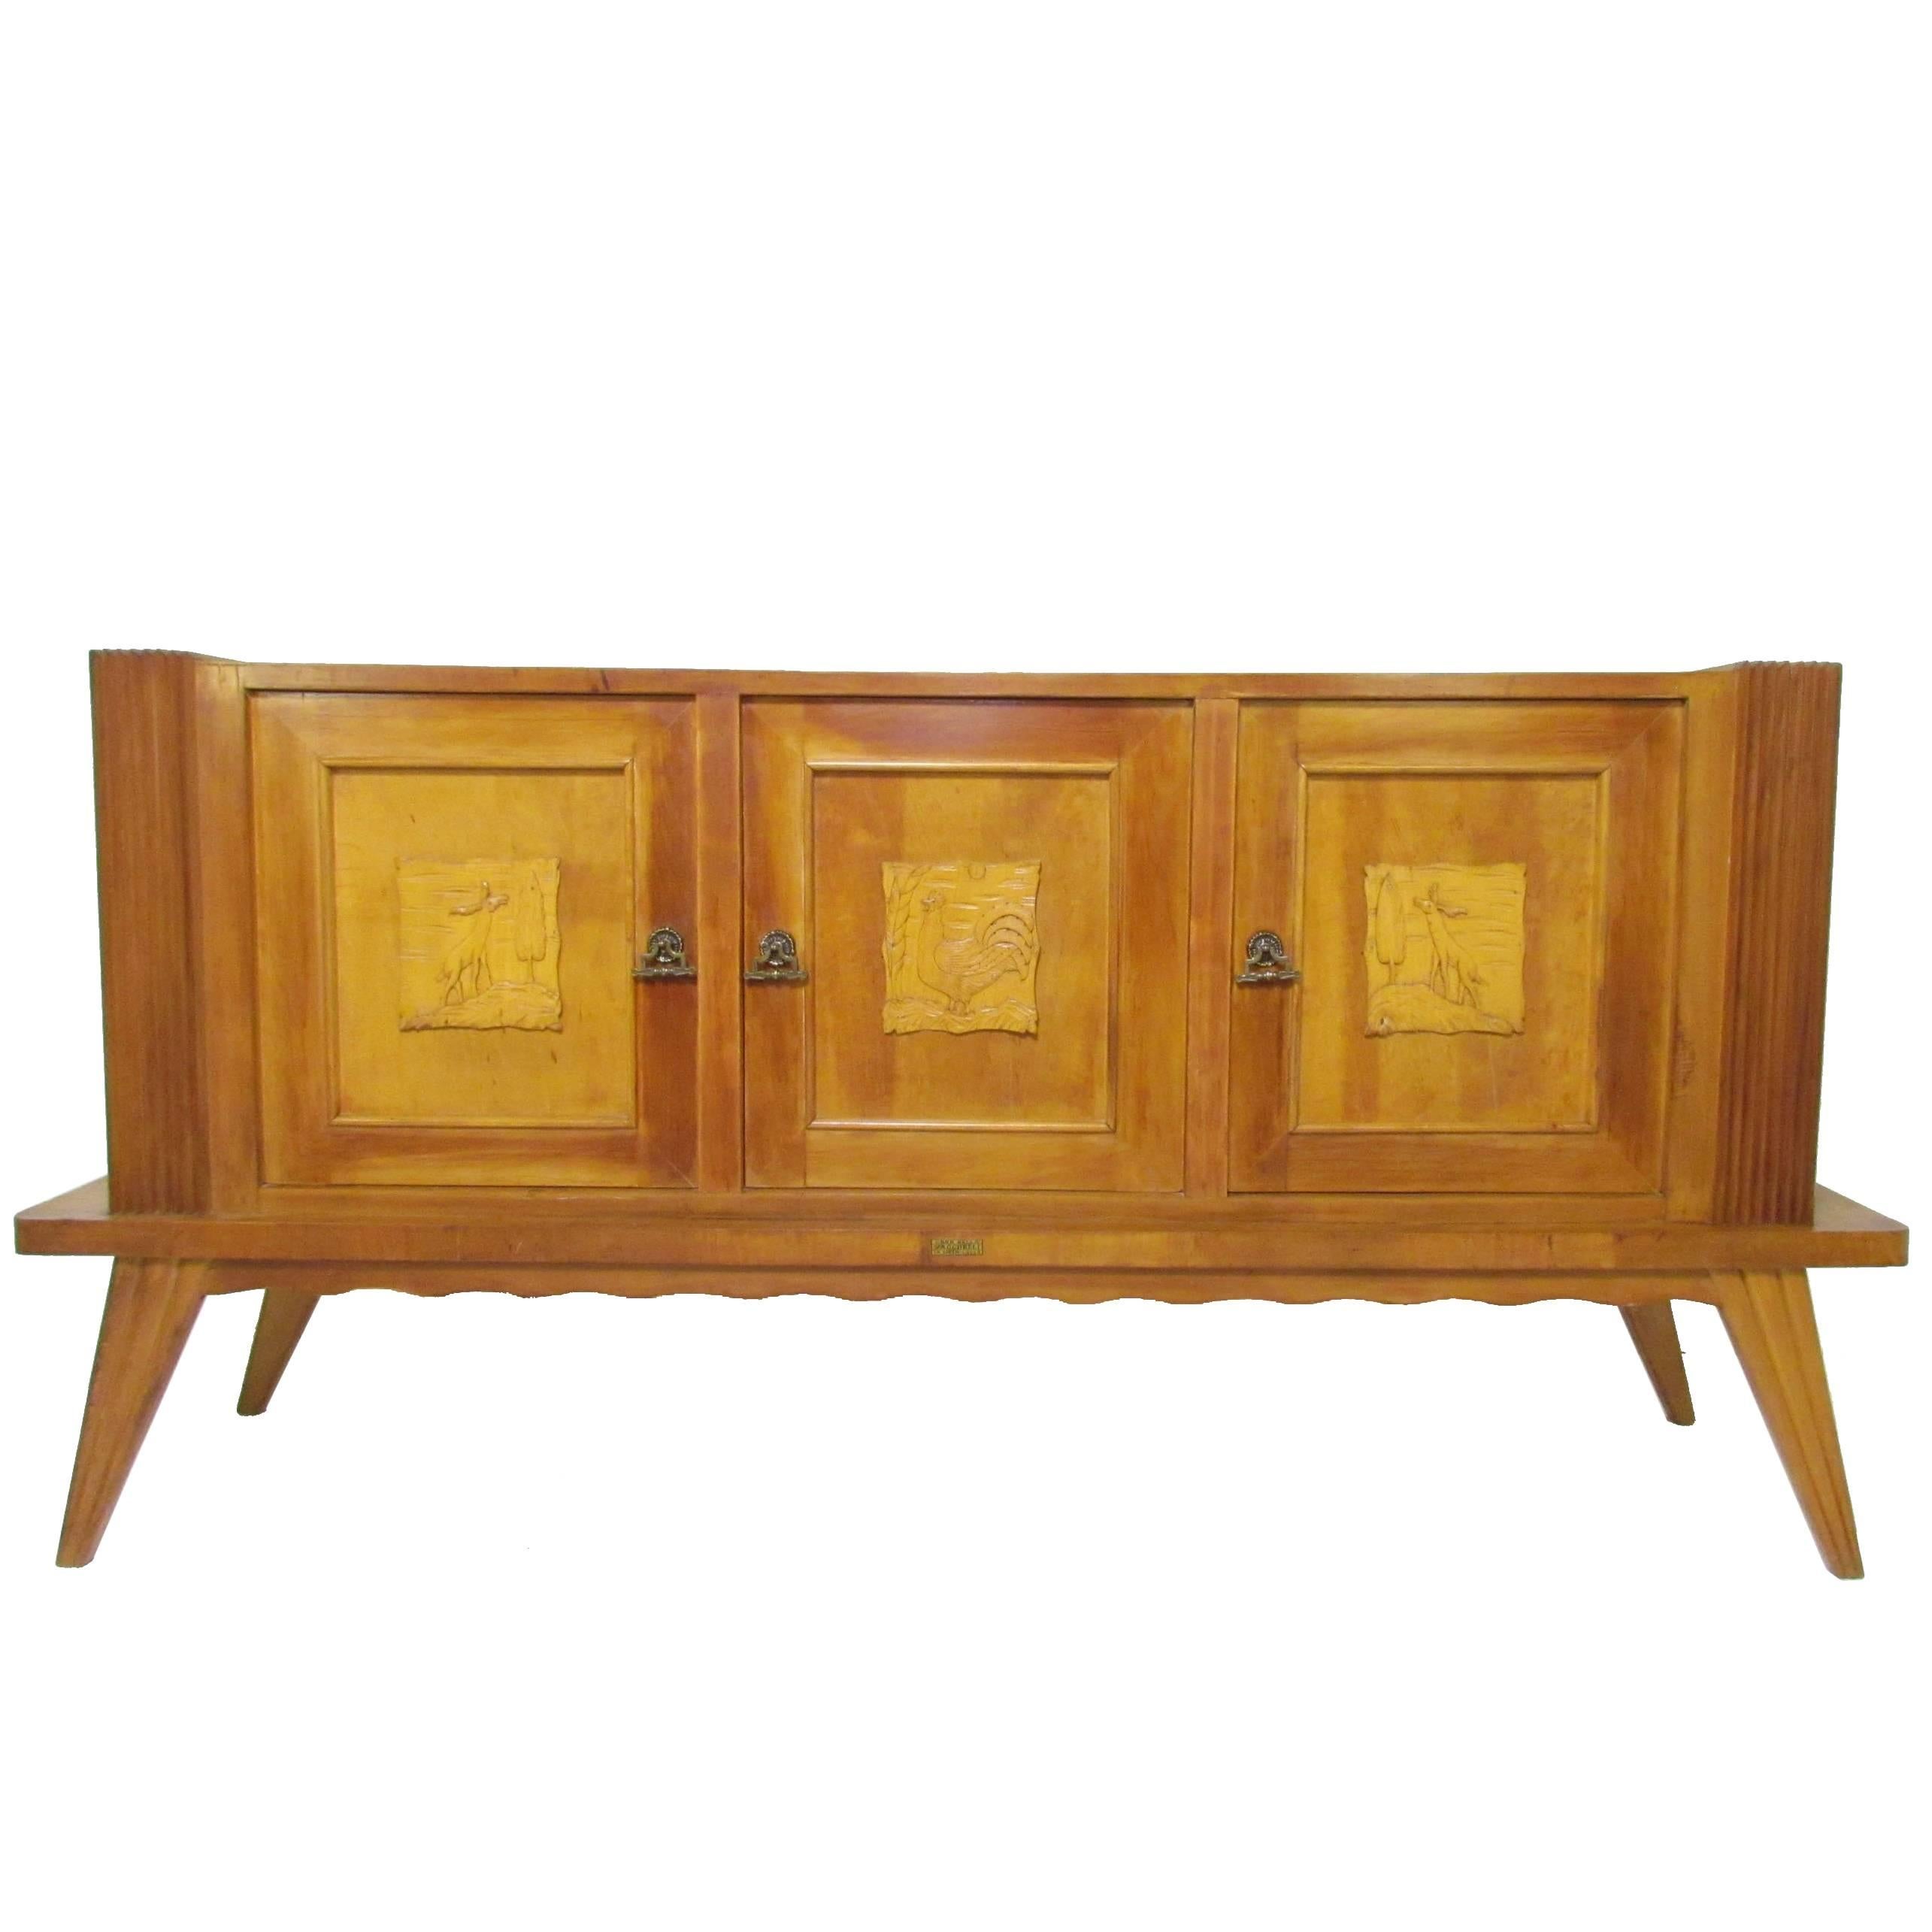 Italian Art Deco Sideboard with Hand-Carved Decorative Panels, circa 1940s